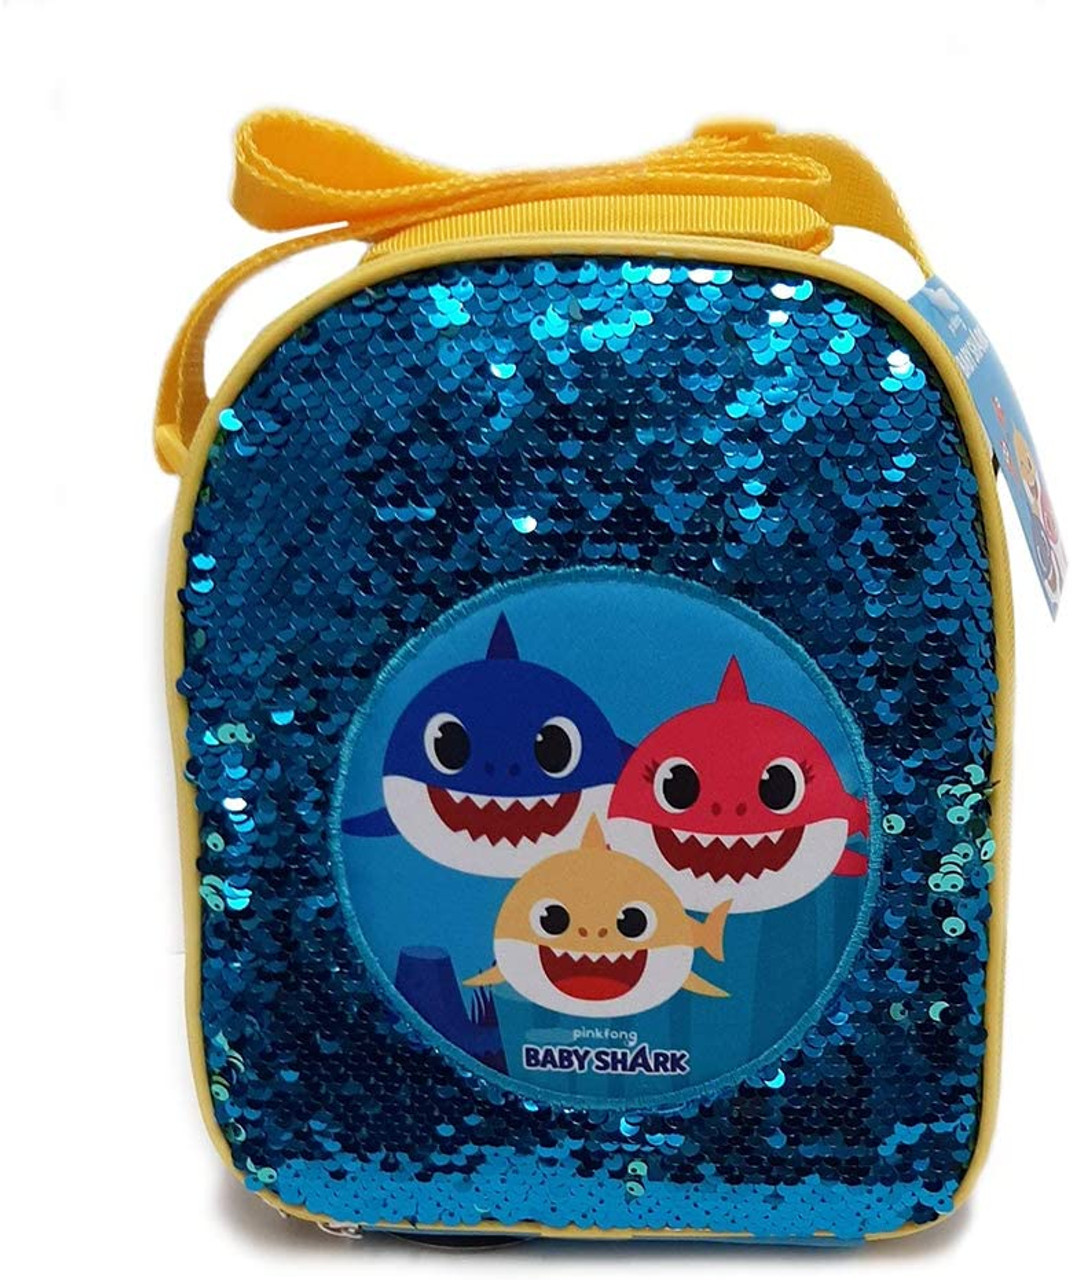 https://cdn11.bigcommerce.com/s-mhr53lwccw/images/stencil/1280x1280/products/579/7924/baby-shark-blue-magic-sequins-lunch-box-10-inch__69838.1663975252.jpg?c=1?imbypass=on